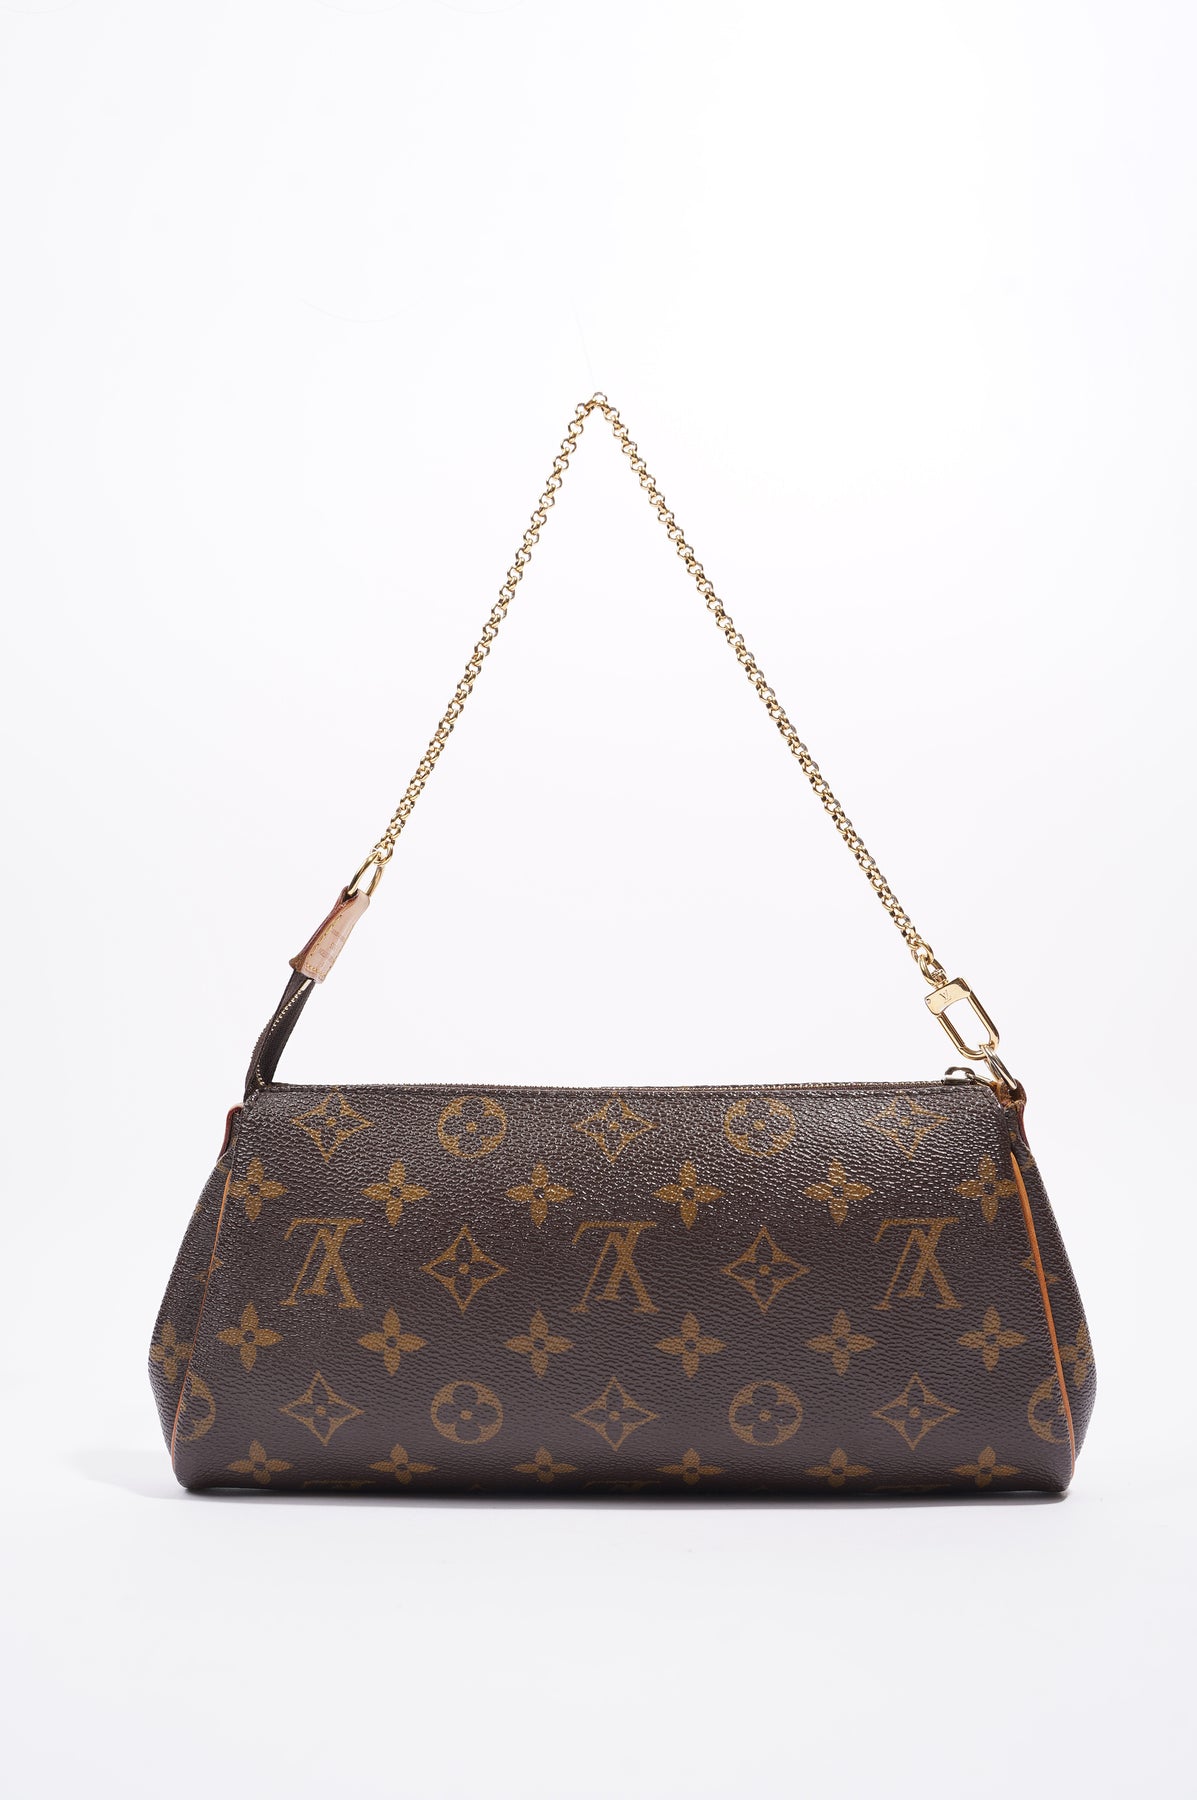 LOUIS VUITTON Leather Beige Shoulder Strap For Eva and Similar Styles